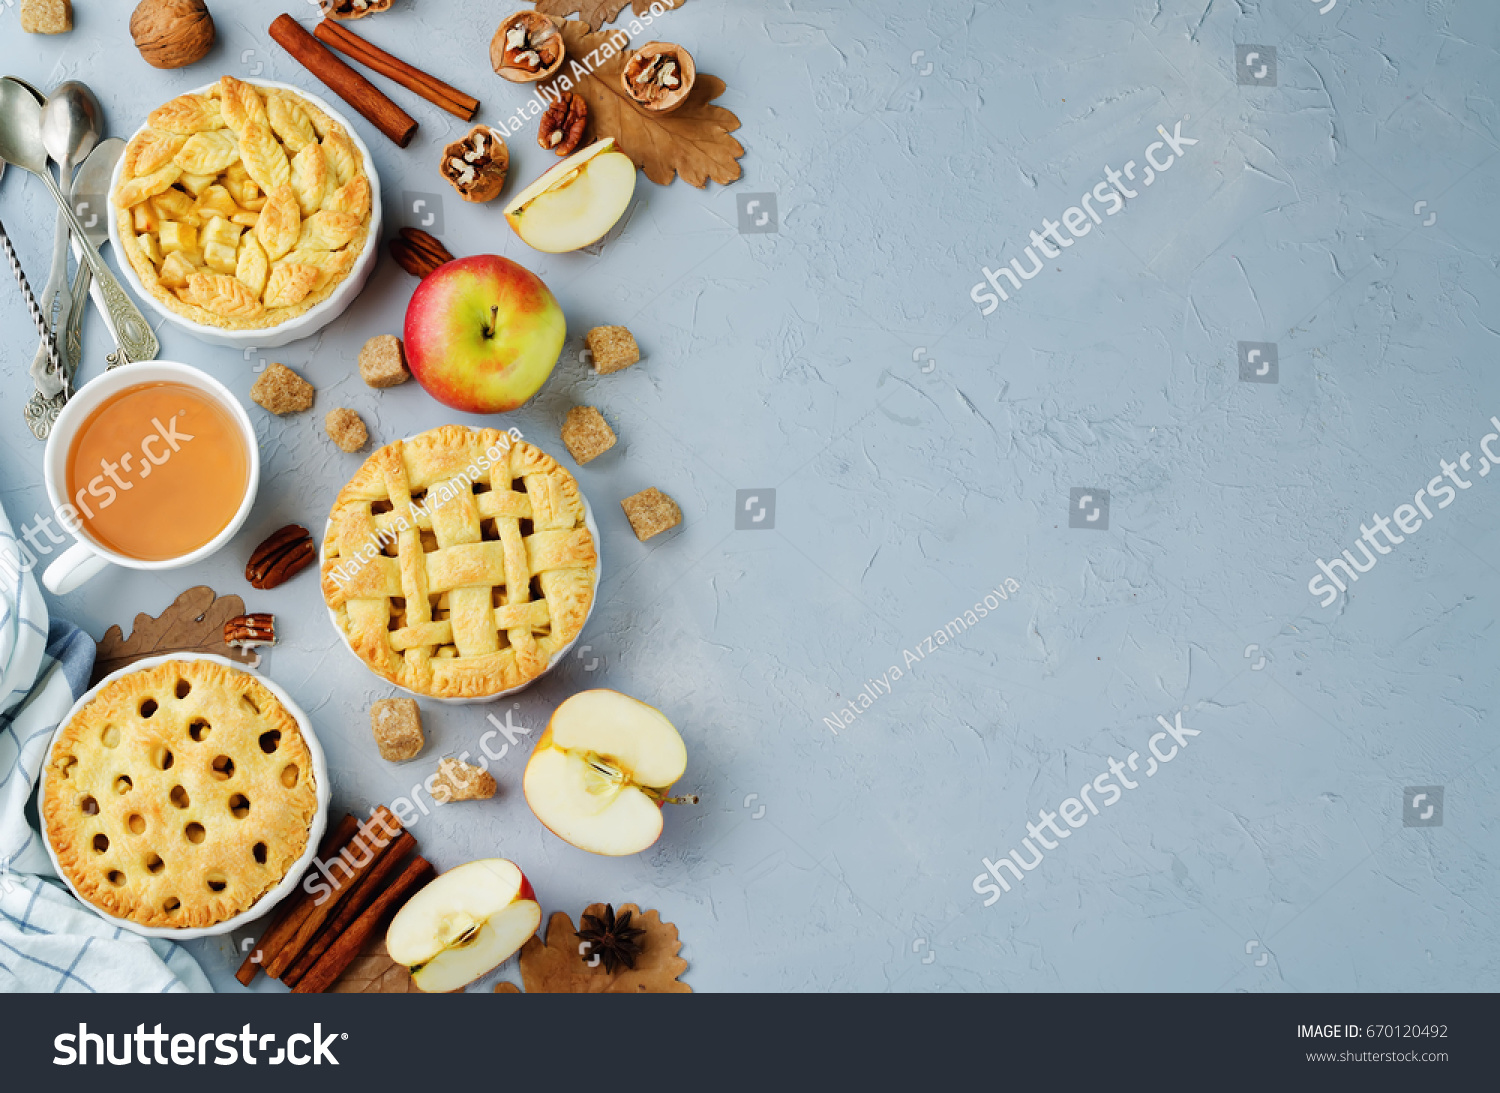 Apple pies with different design on a grey background. toning. selective focus #670120492